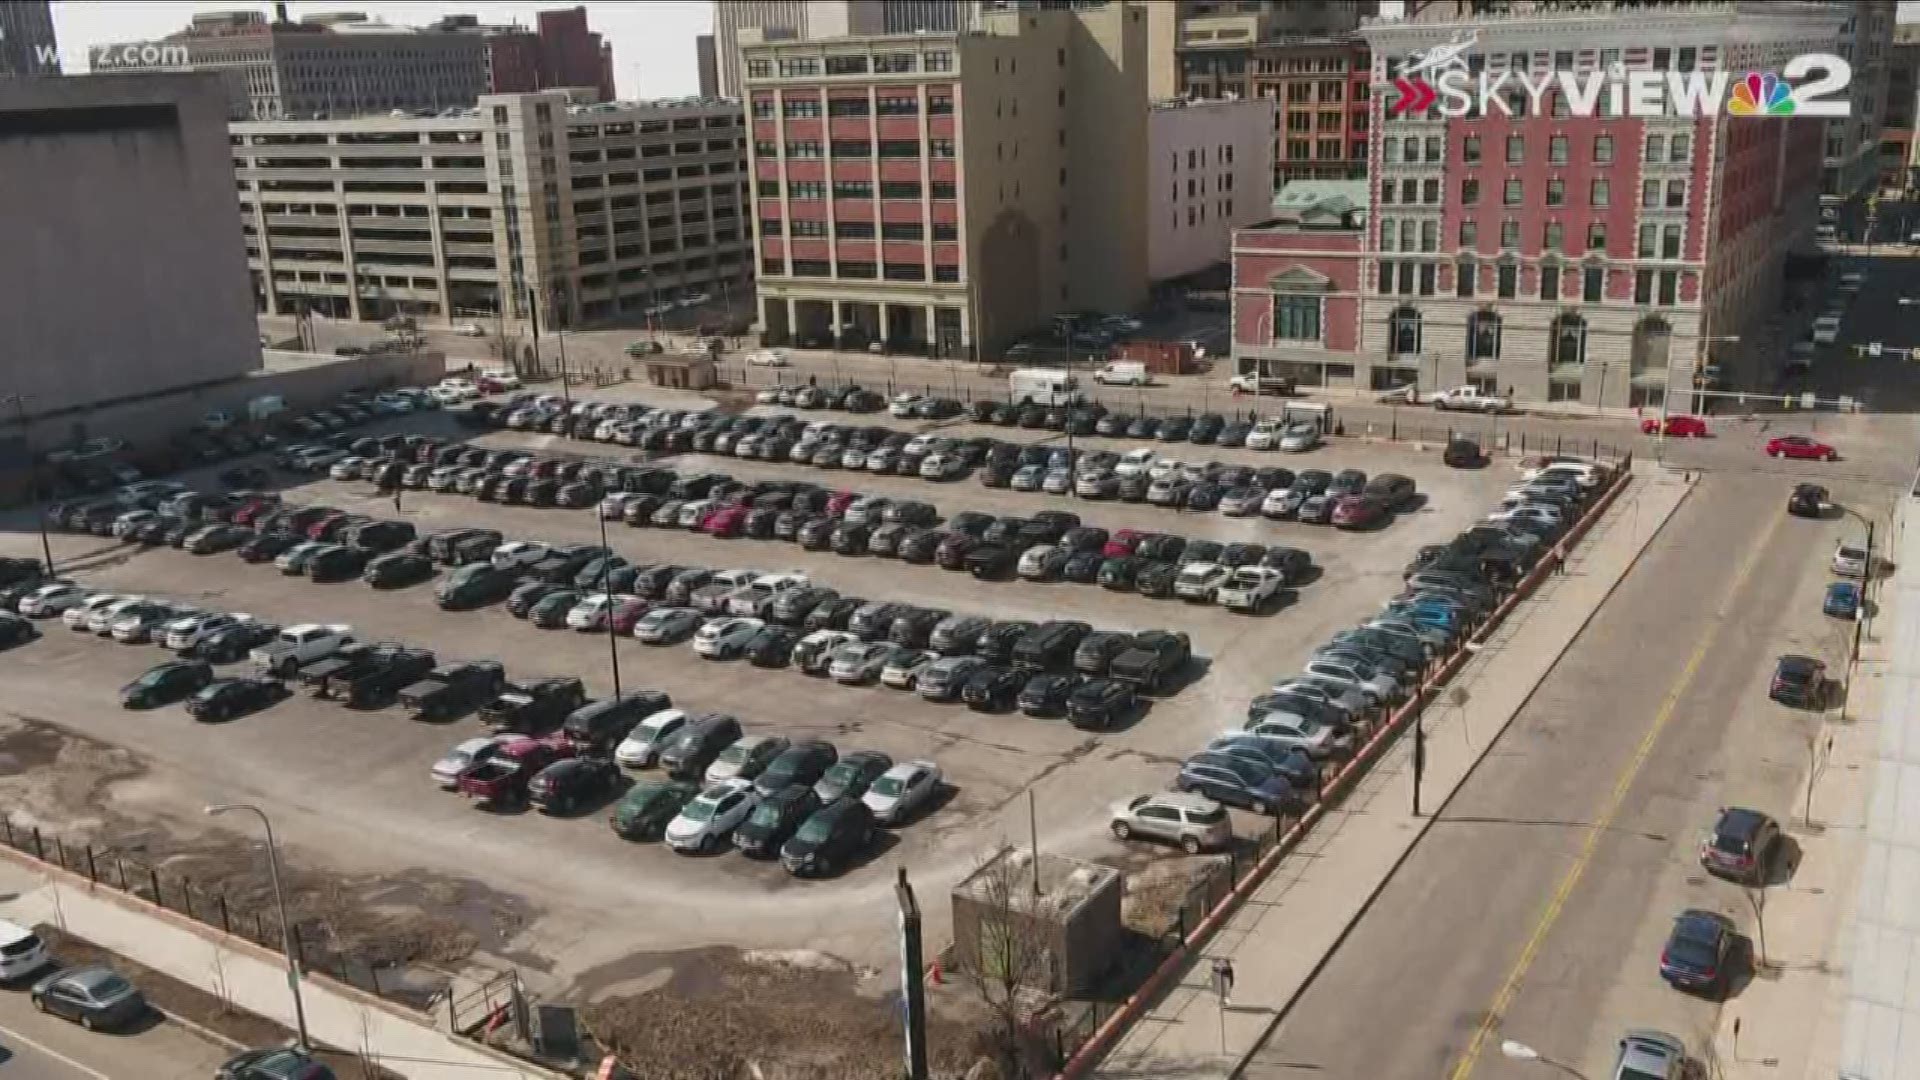 that's going to add a market and apartments to what's now a parking lot.